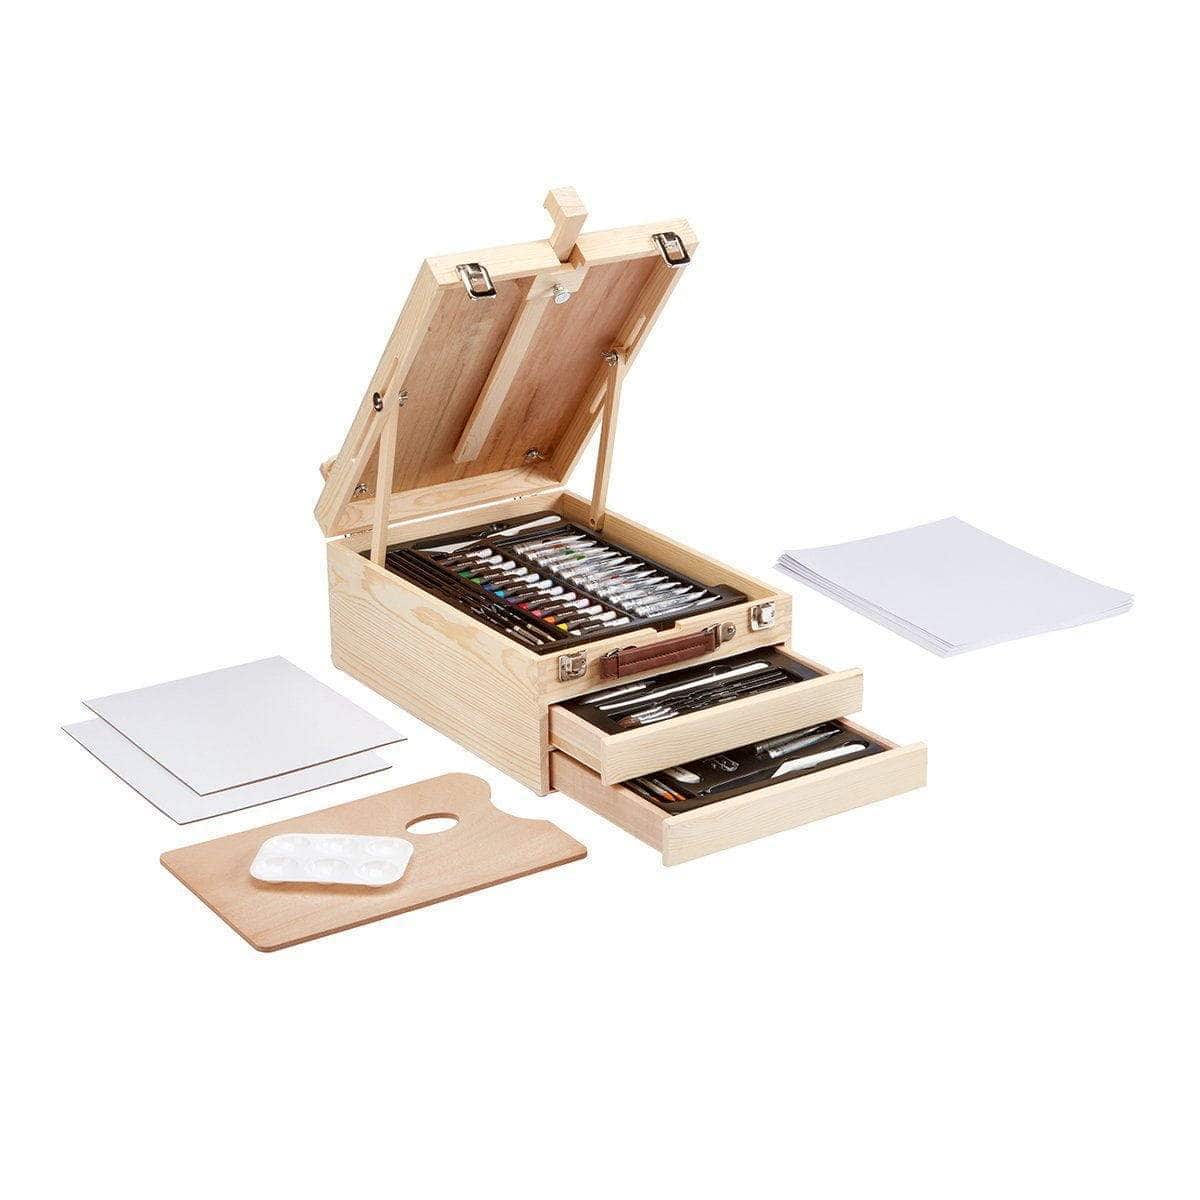 Soho Urban Artist Sketch Box and Table Easel - Portable, Multi Media,  Adjustable Angle with Storage Compartments - Walnut Finish 